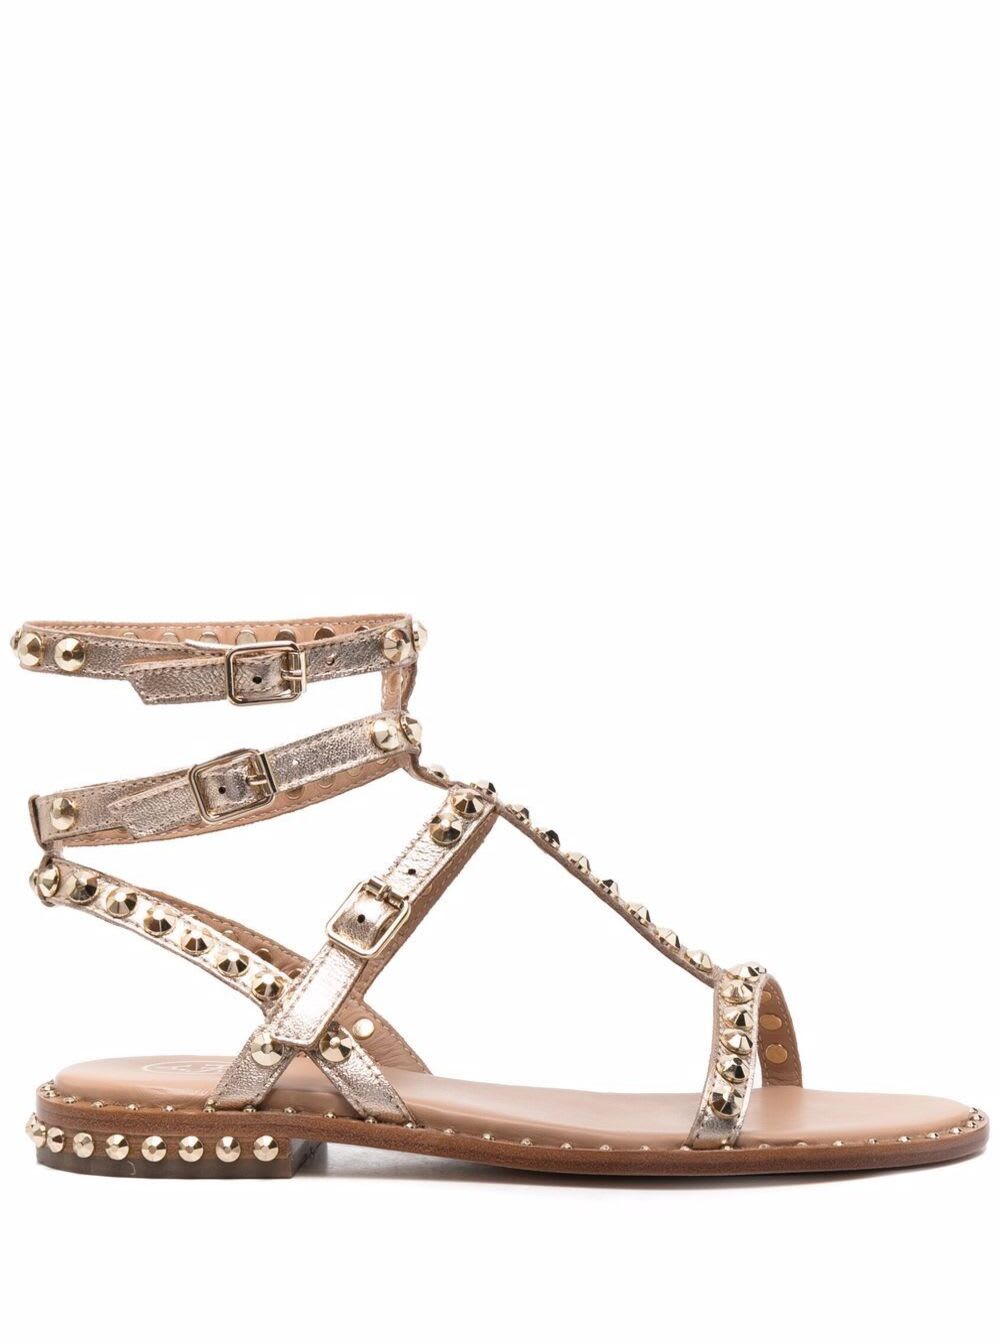 Ash Womans Studded Gold Colored Leather Sandals